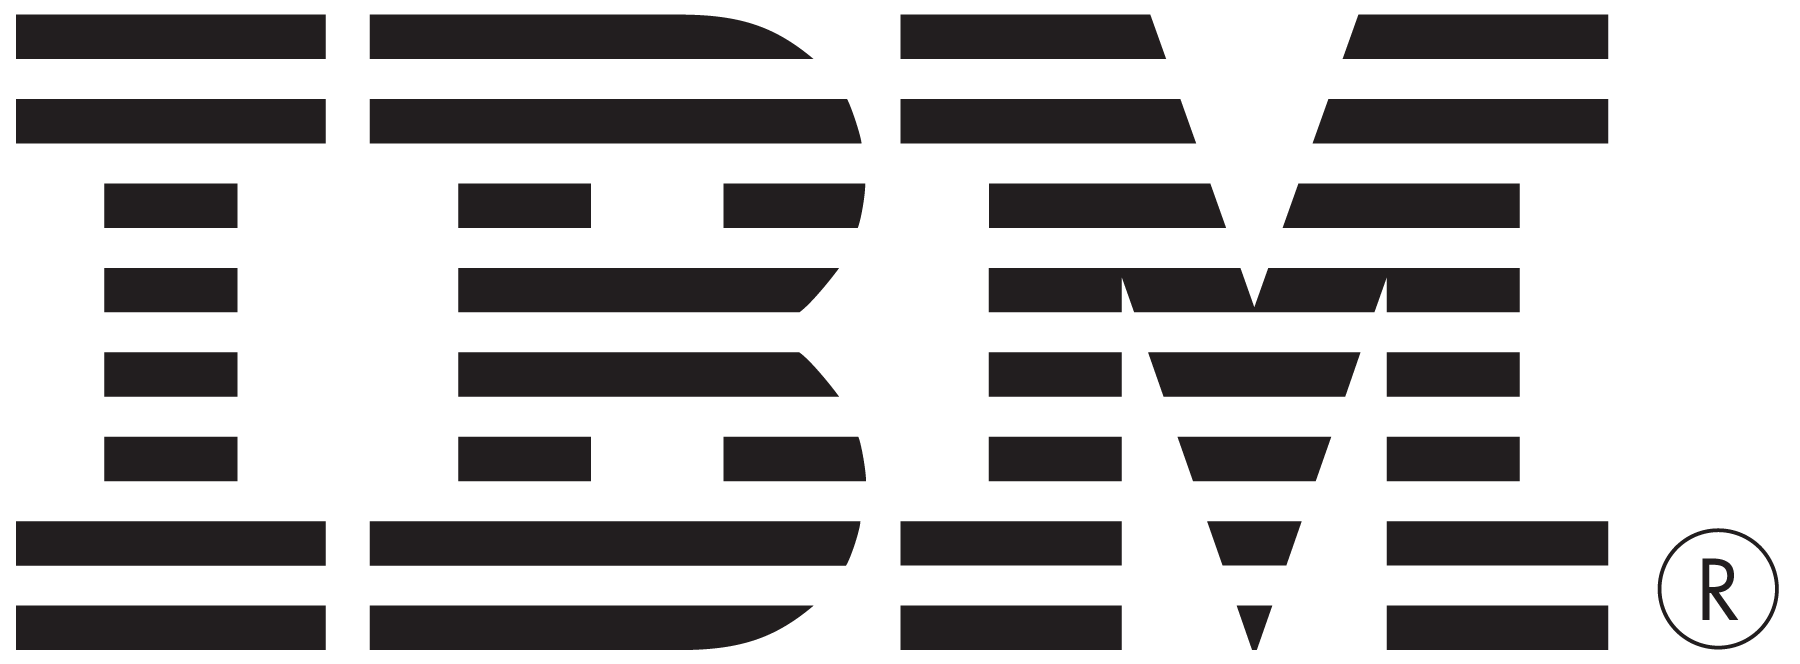 Current IBM Logo - This Key Part of IBM Is Growing Again -- The Motley Fool